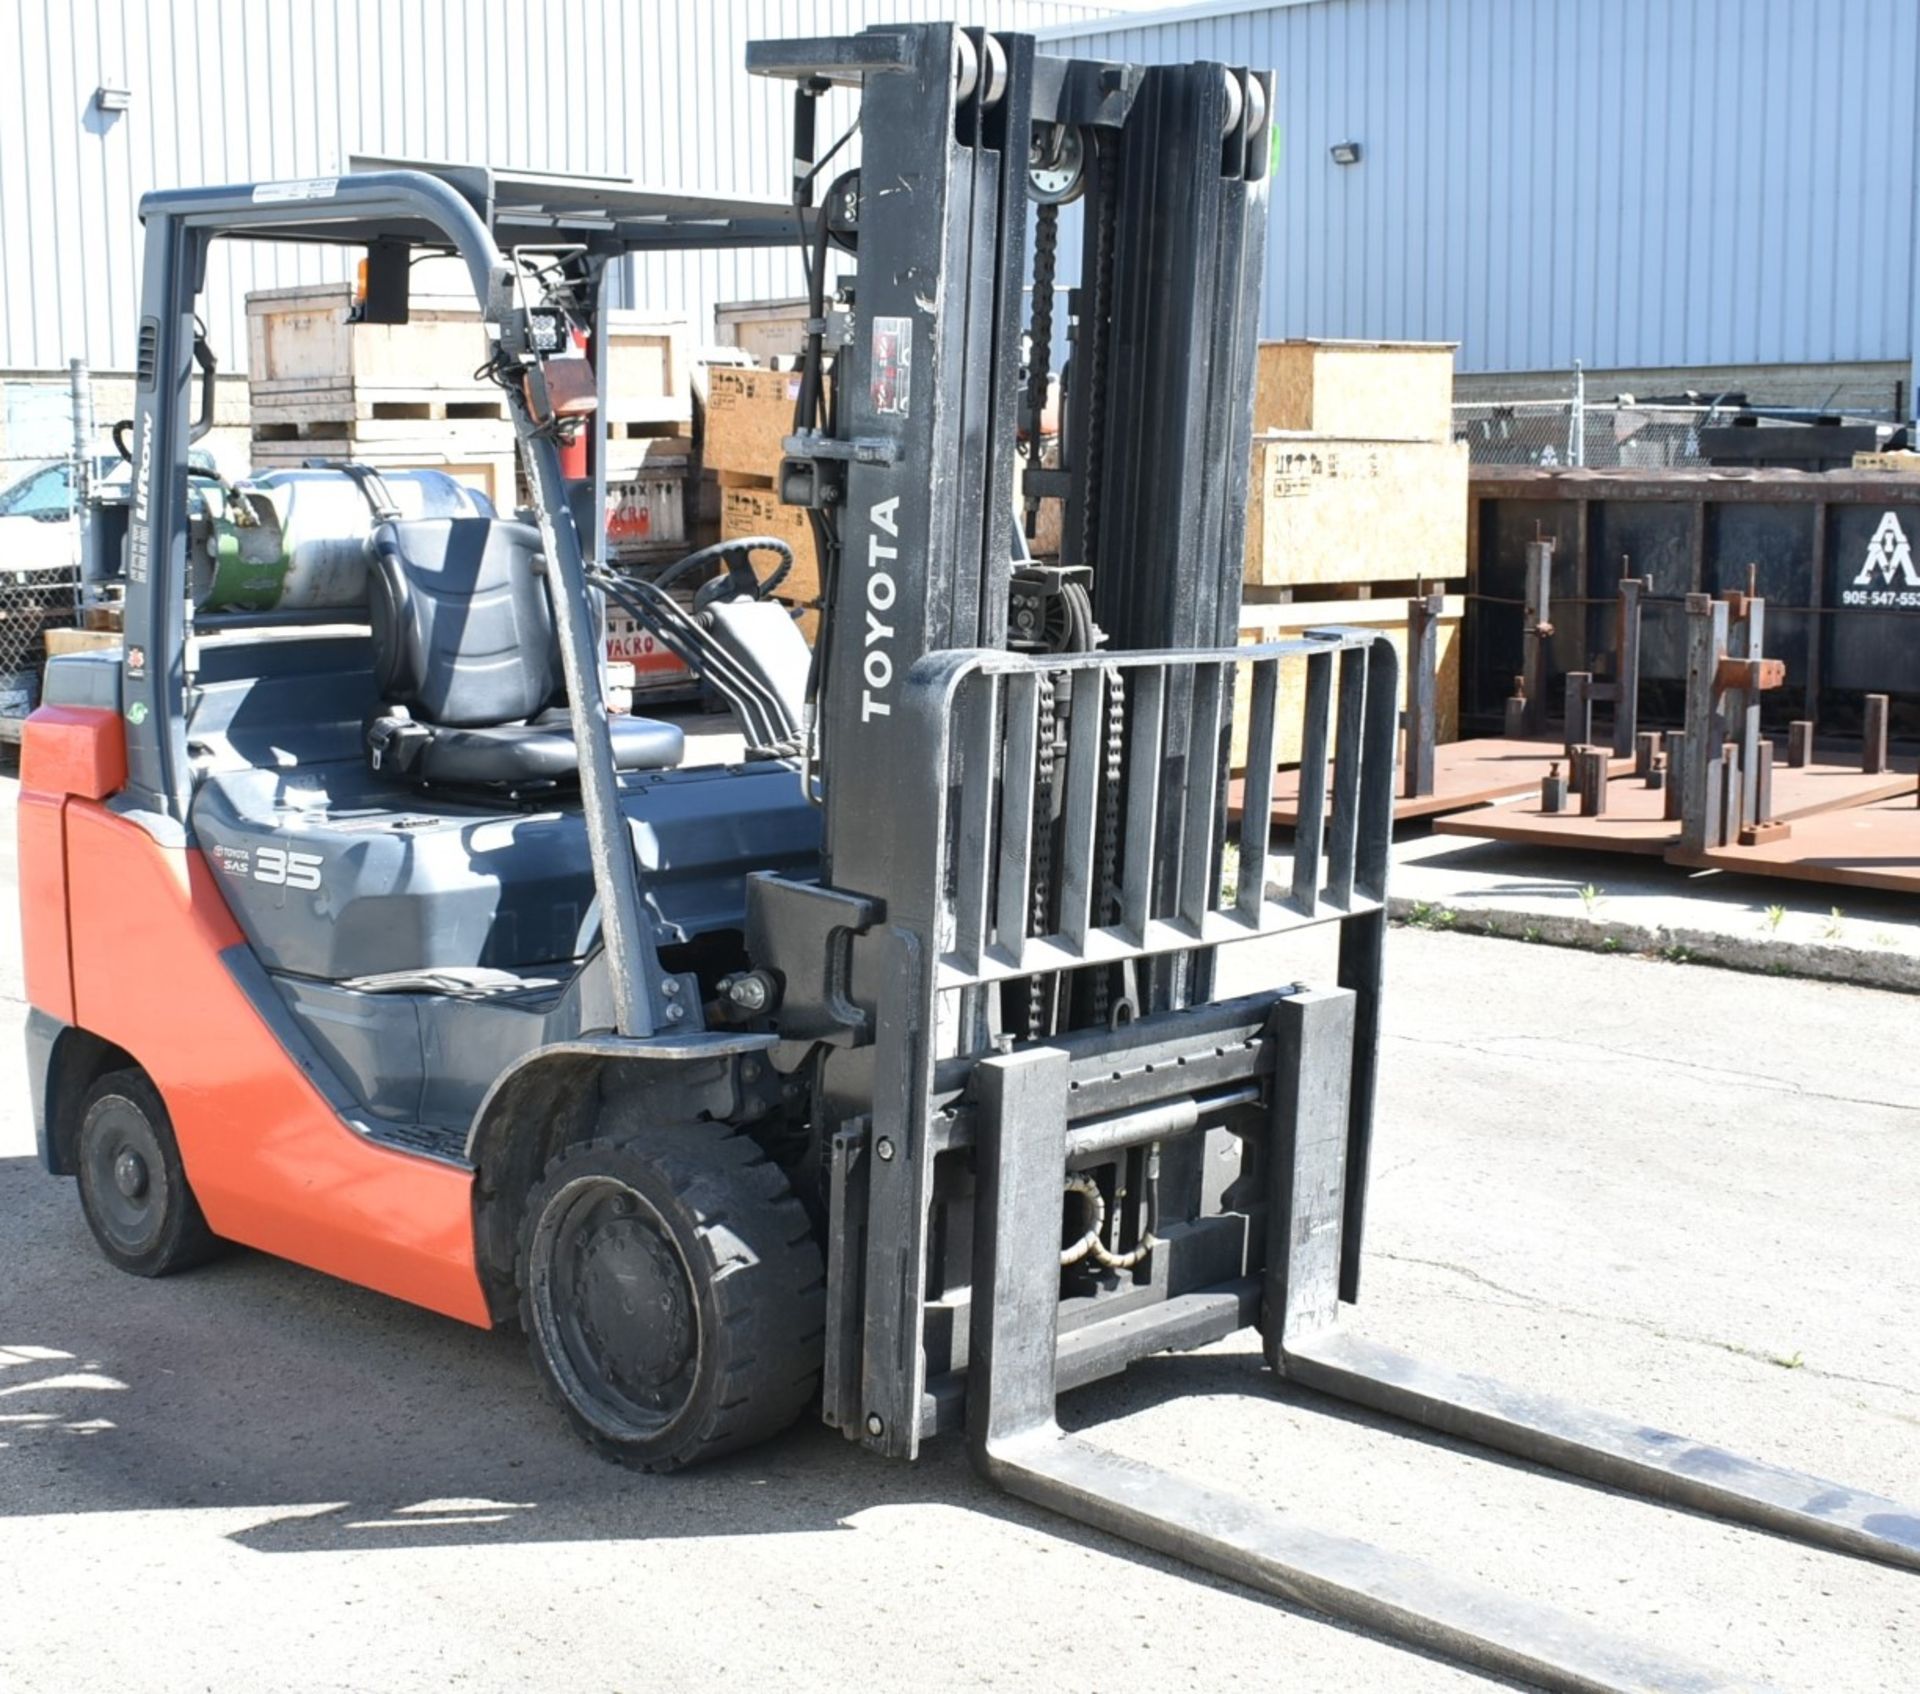 TOYOTA (2018) GC35U LPG FORKLIFT WITH 7250 LBS MAX CAPACITY, 187" 3-STAGE HIGH VISIBILITY MAST, - Image 4 of 8